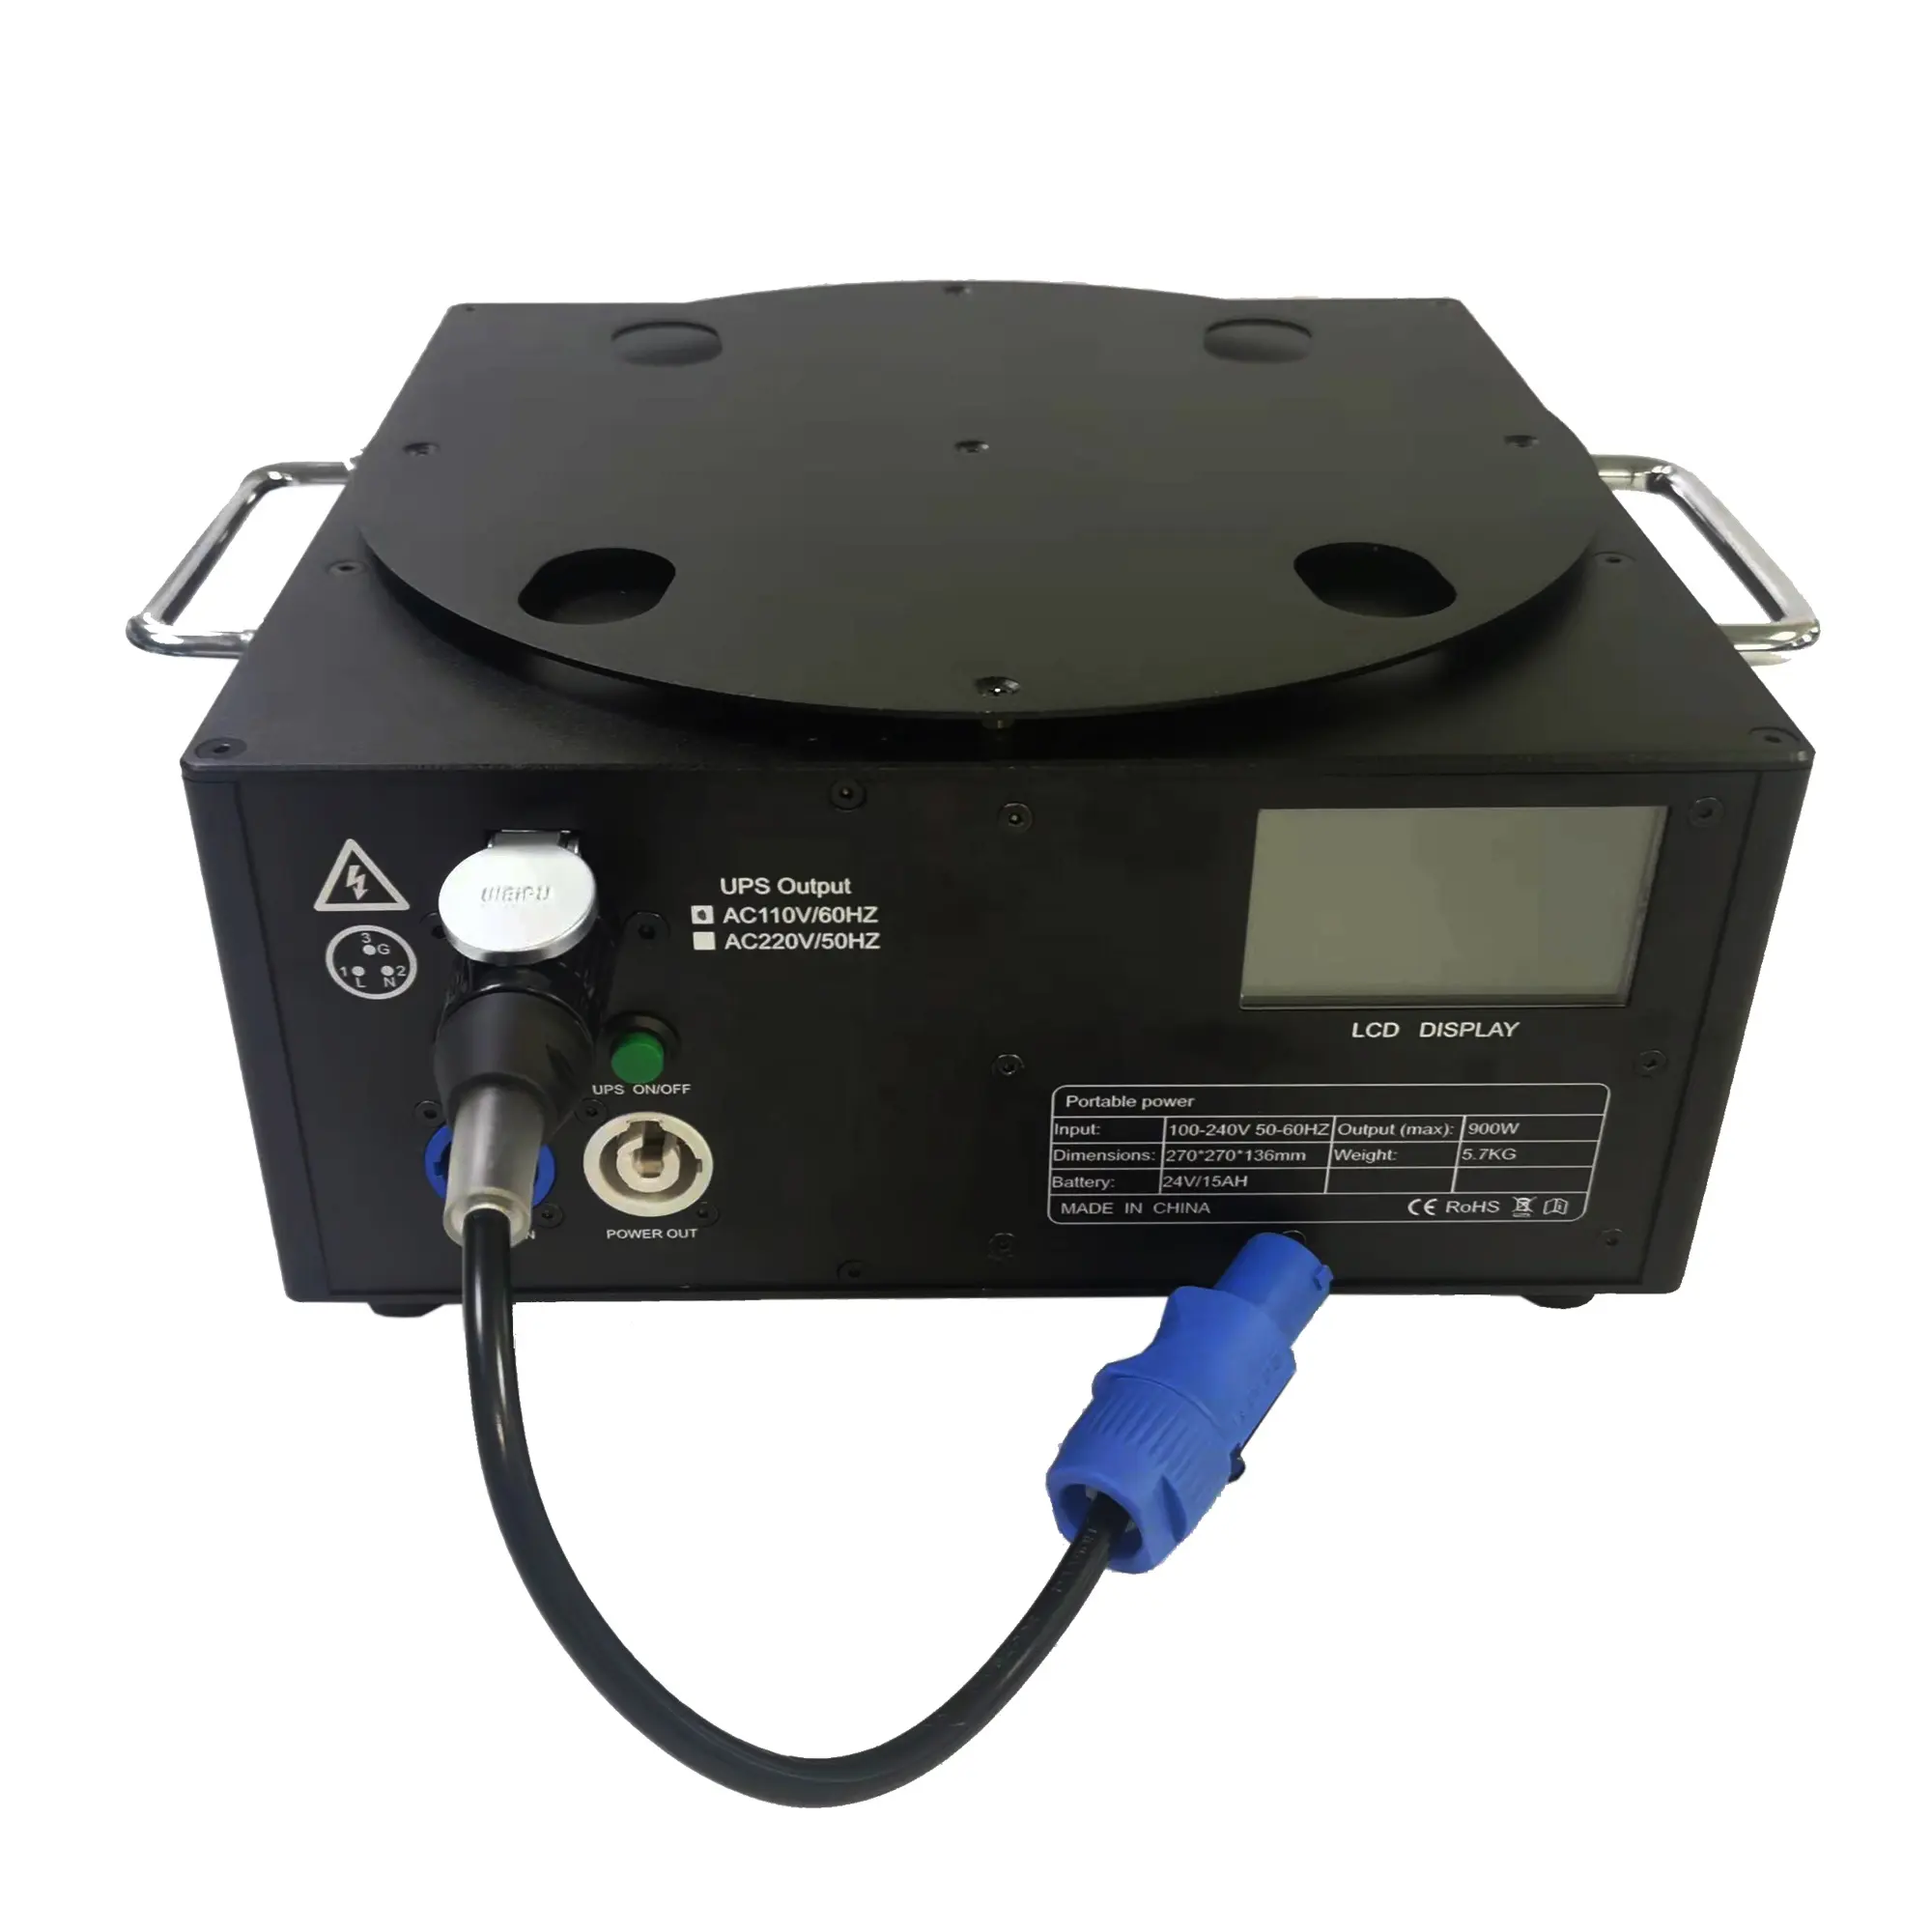 900W Battery base for spark machines to supply power for event